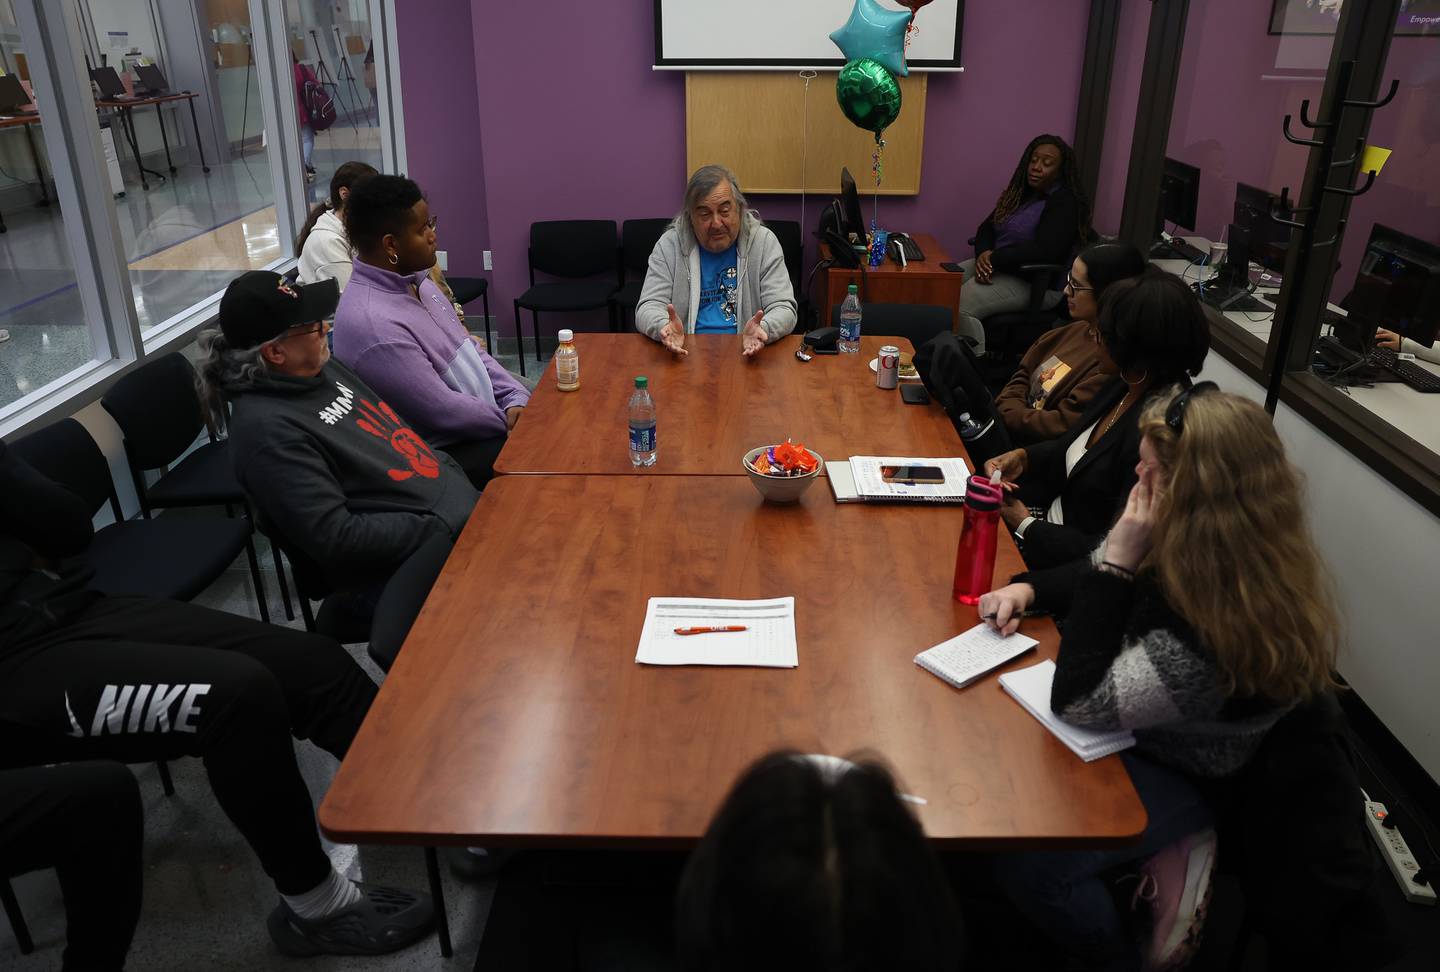 Joseph “Standing Bear” Schranz, from the Ojibwa tribe at White Earth reservation in Minnesota, talks to Joliet Junior College students and staff at a round table discussion on the destructive and dehumanization of Native American culture and their people on Thursday, Nov. 9, 2023 in Joliet.